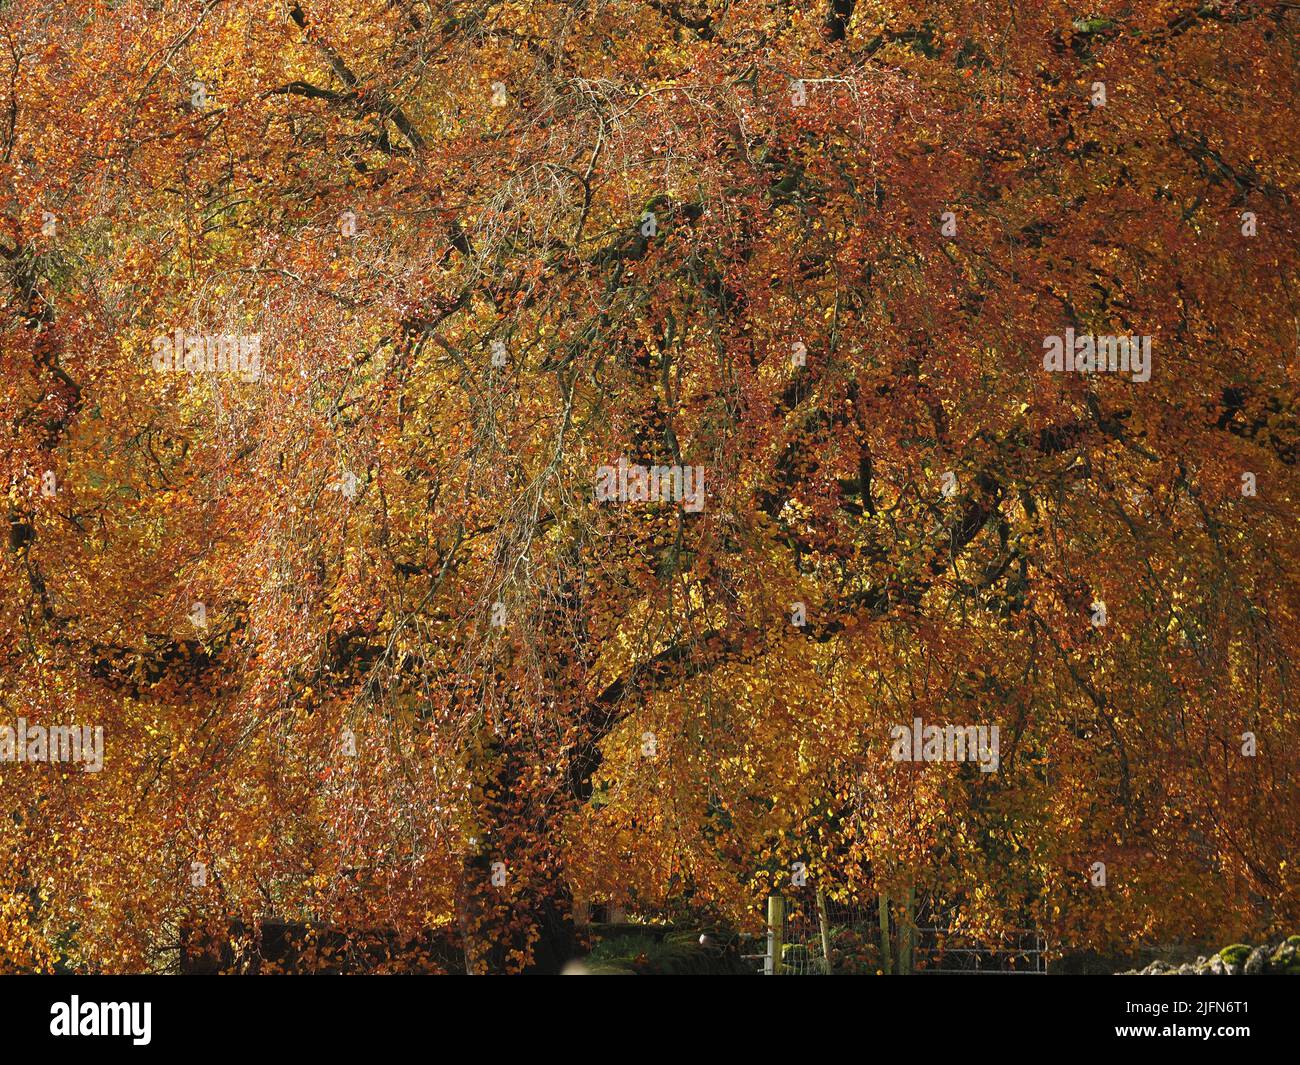 abstract pattern of copper beech tree canopy in Autumn with heavy shaded branches breaking up golden shades of fall foliage - Cumbria, England, UK Stock Photo